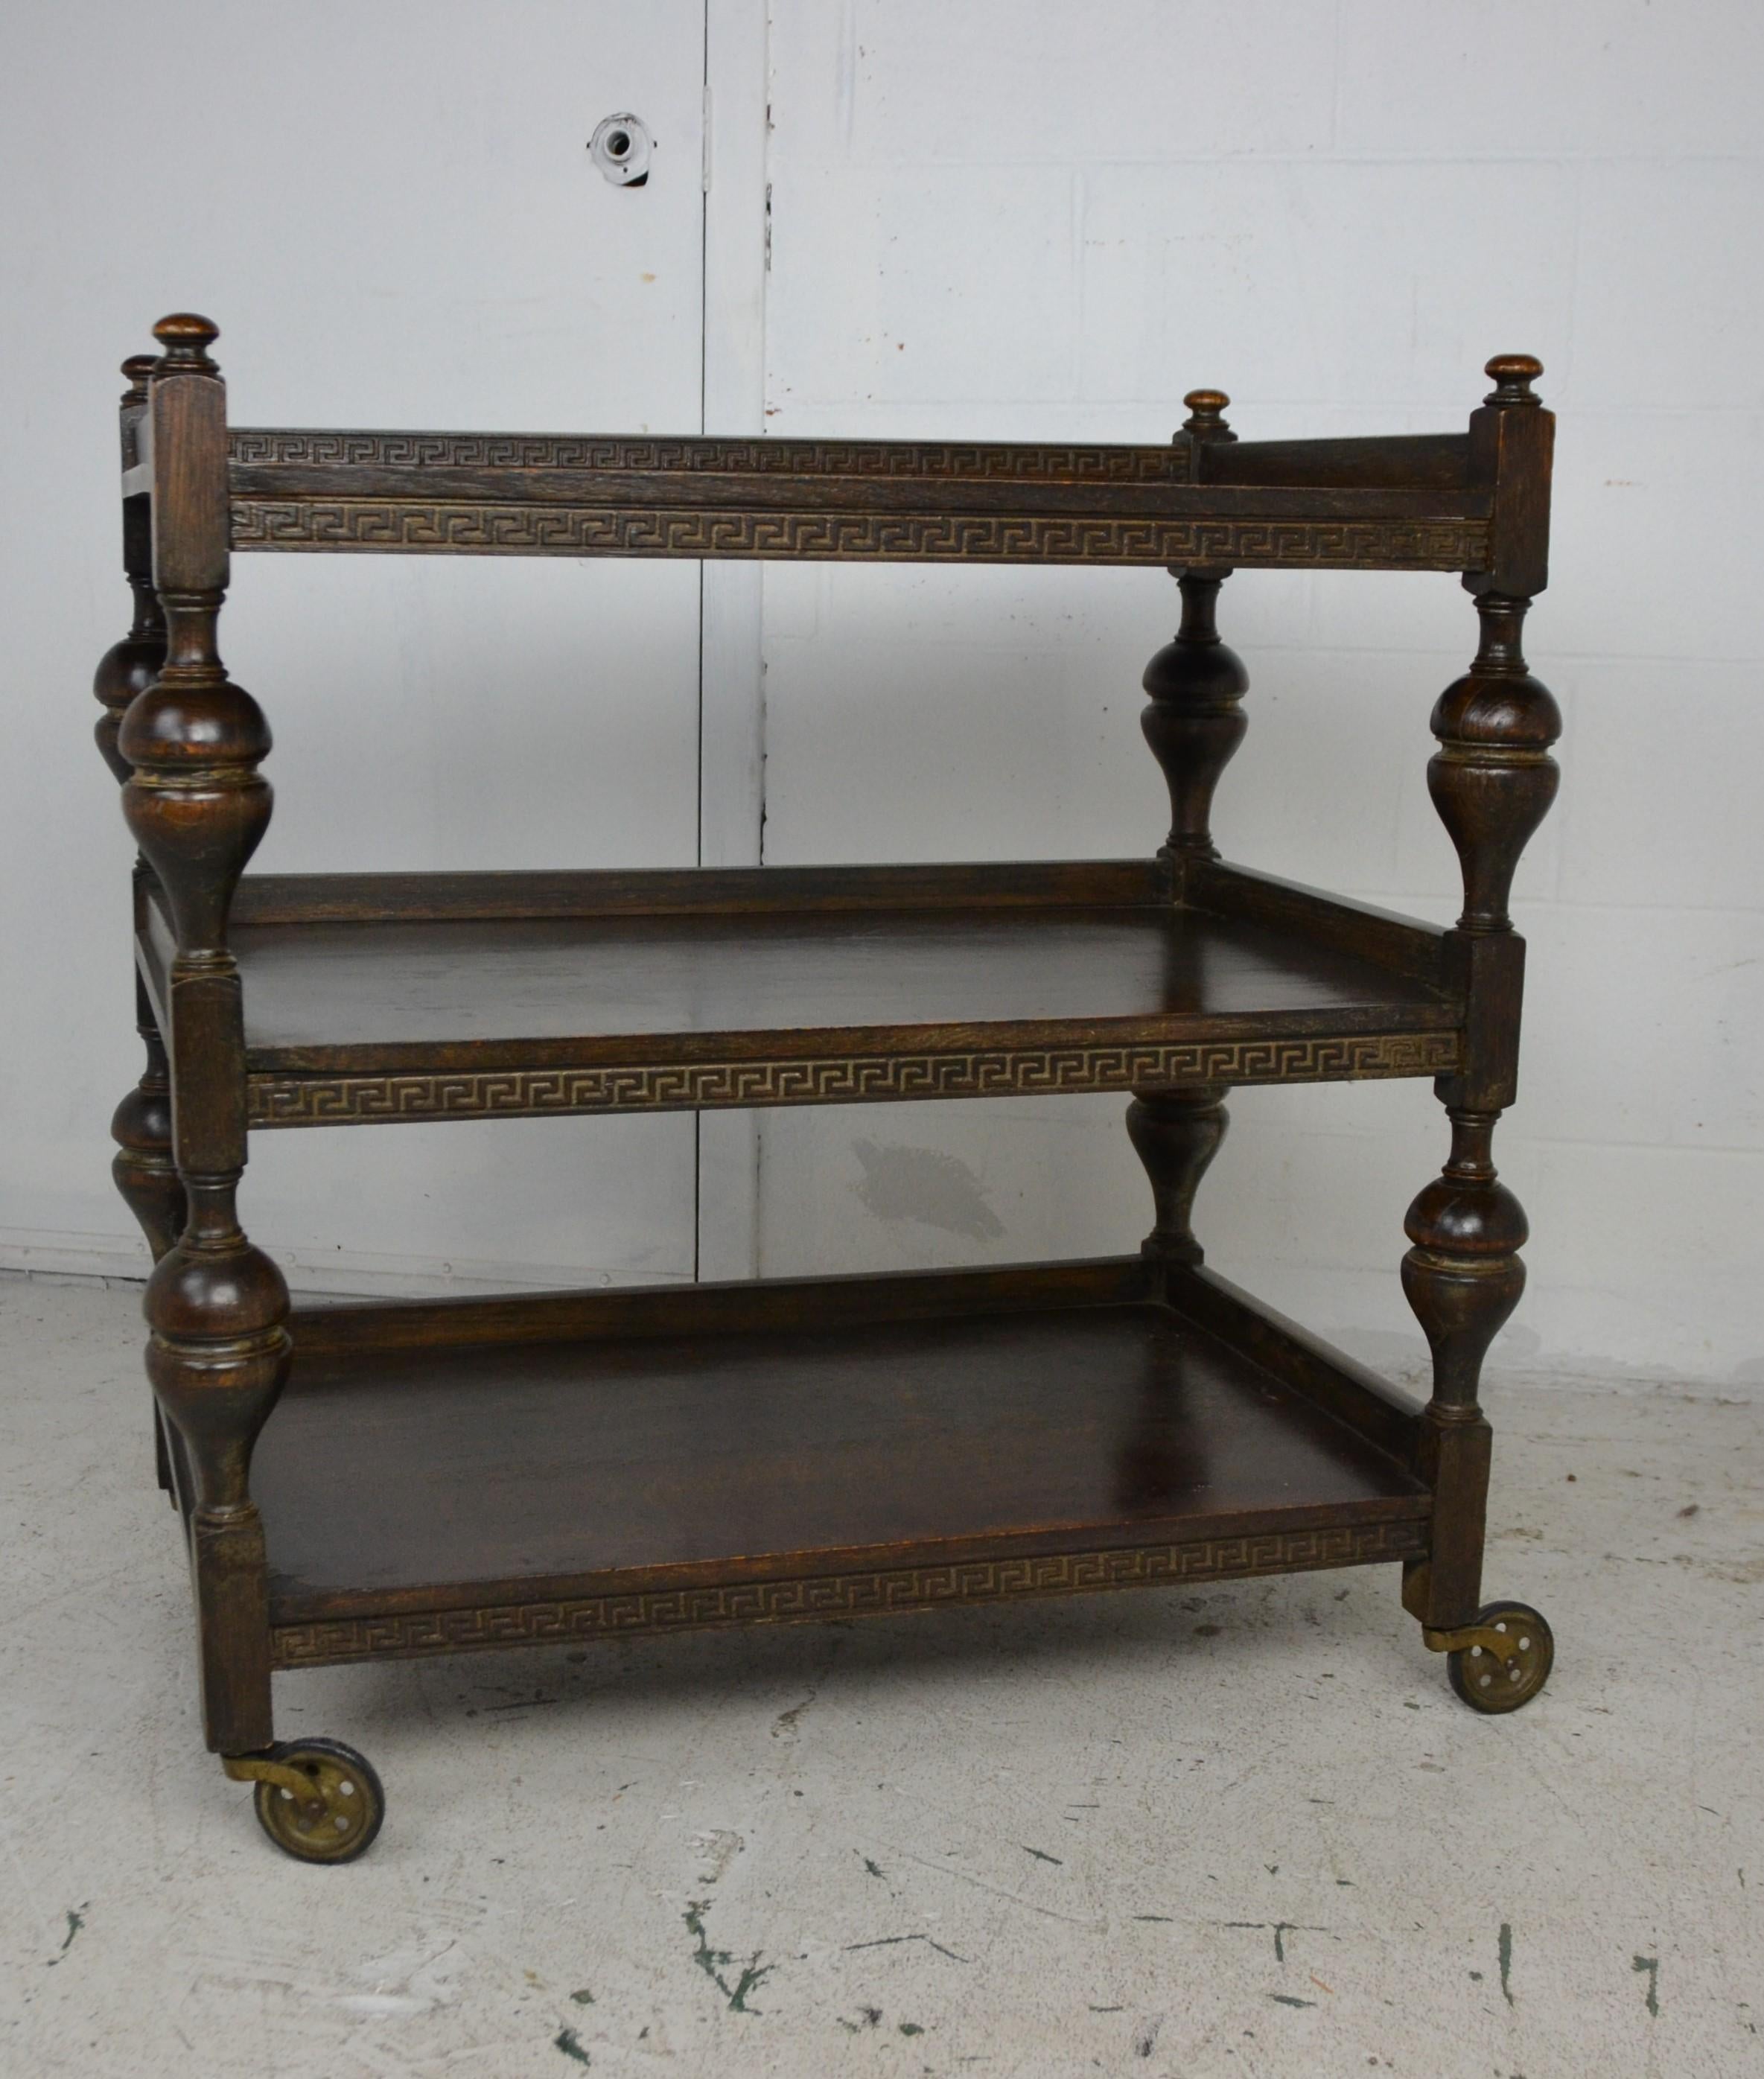 A solid oak tea cart made in England in the mid-1920s. Baluster shape turned uprights. Excellent original finish. Fitted with rubber-tired wheels.